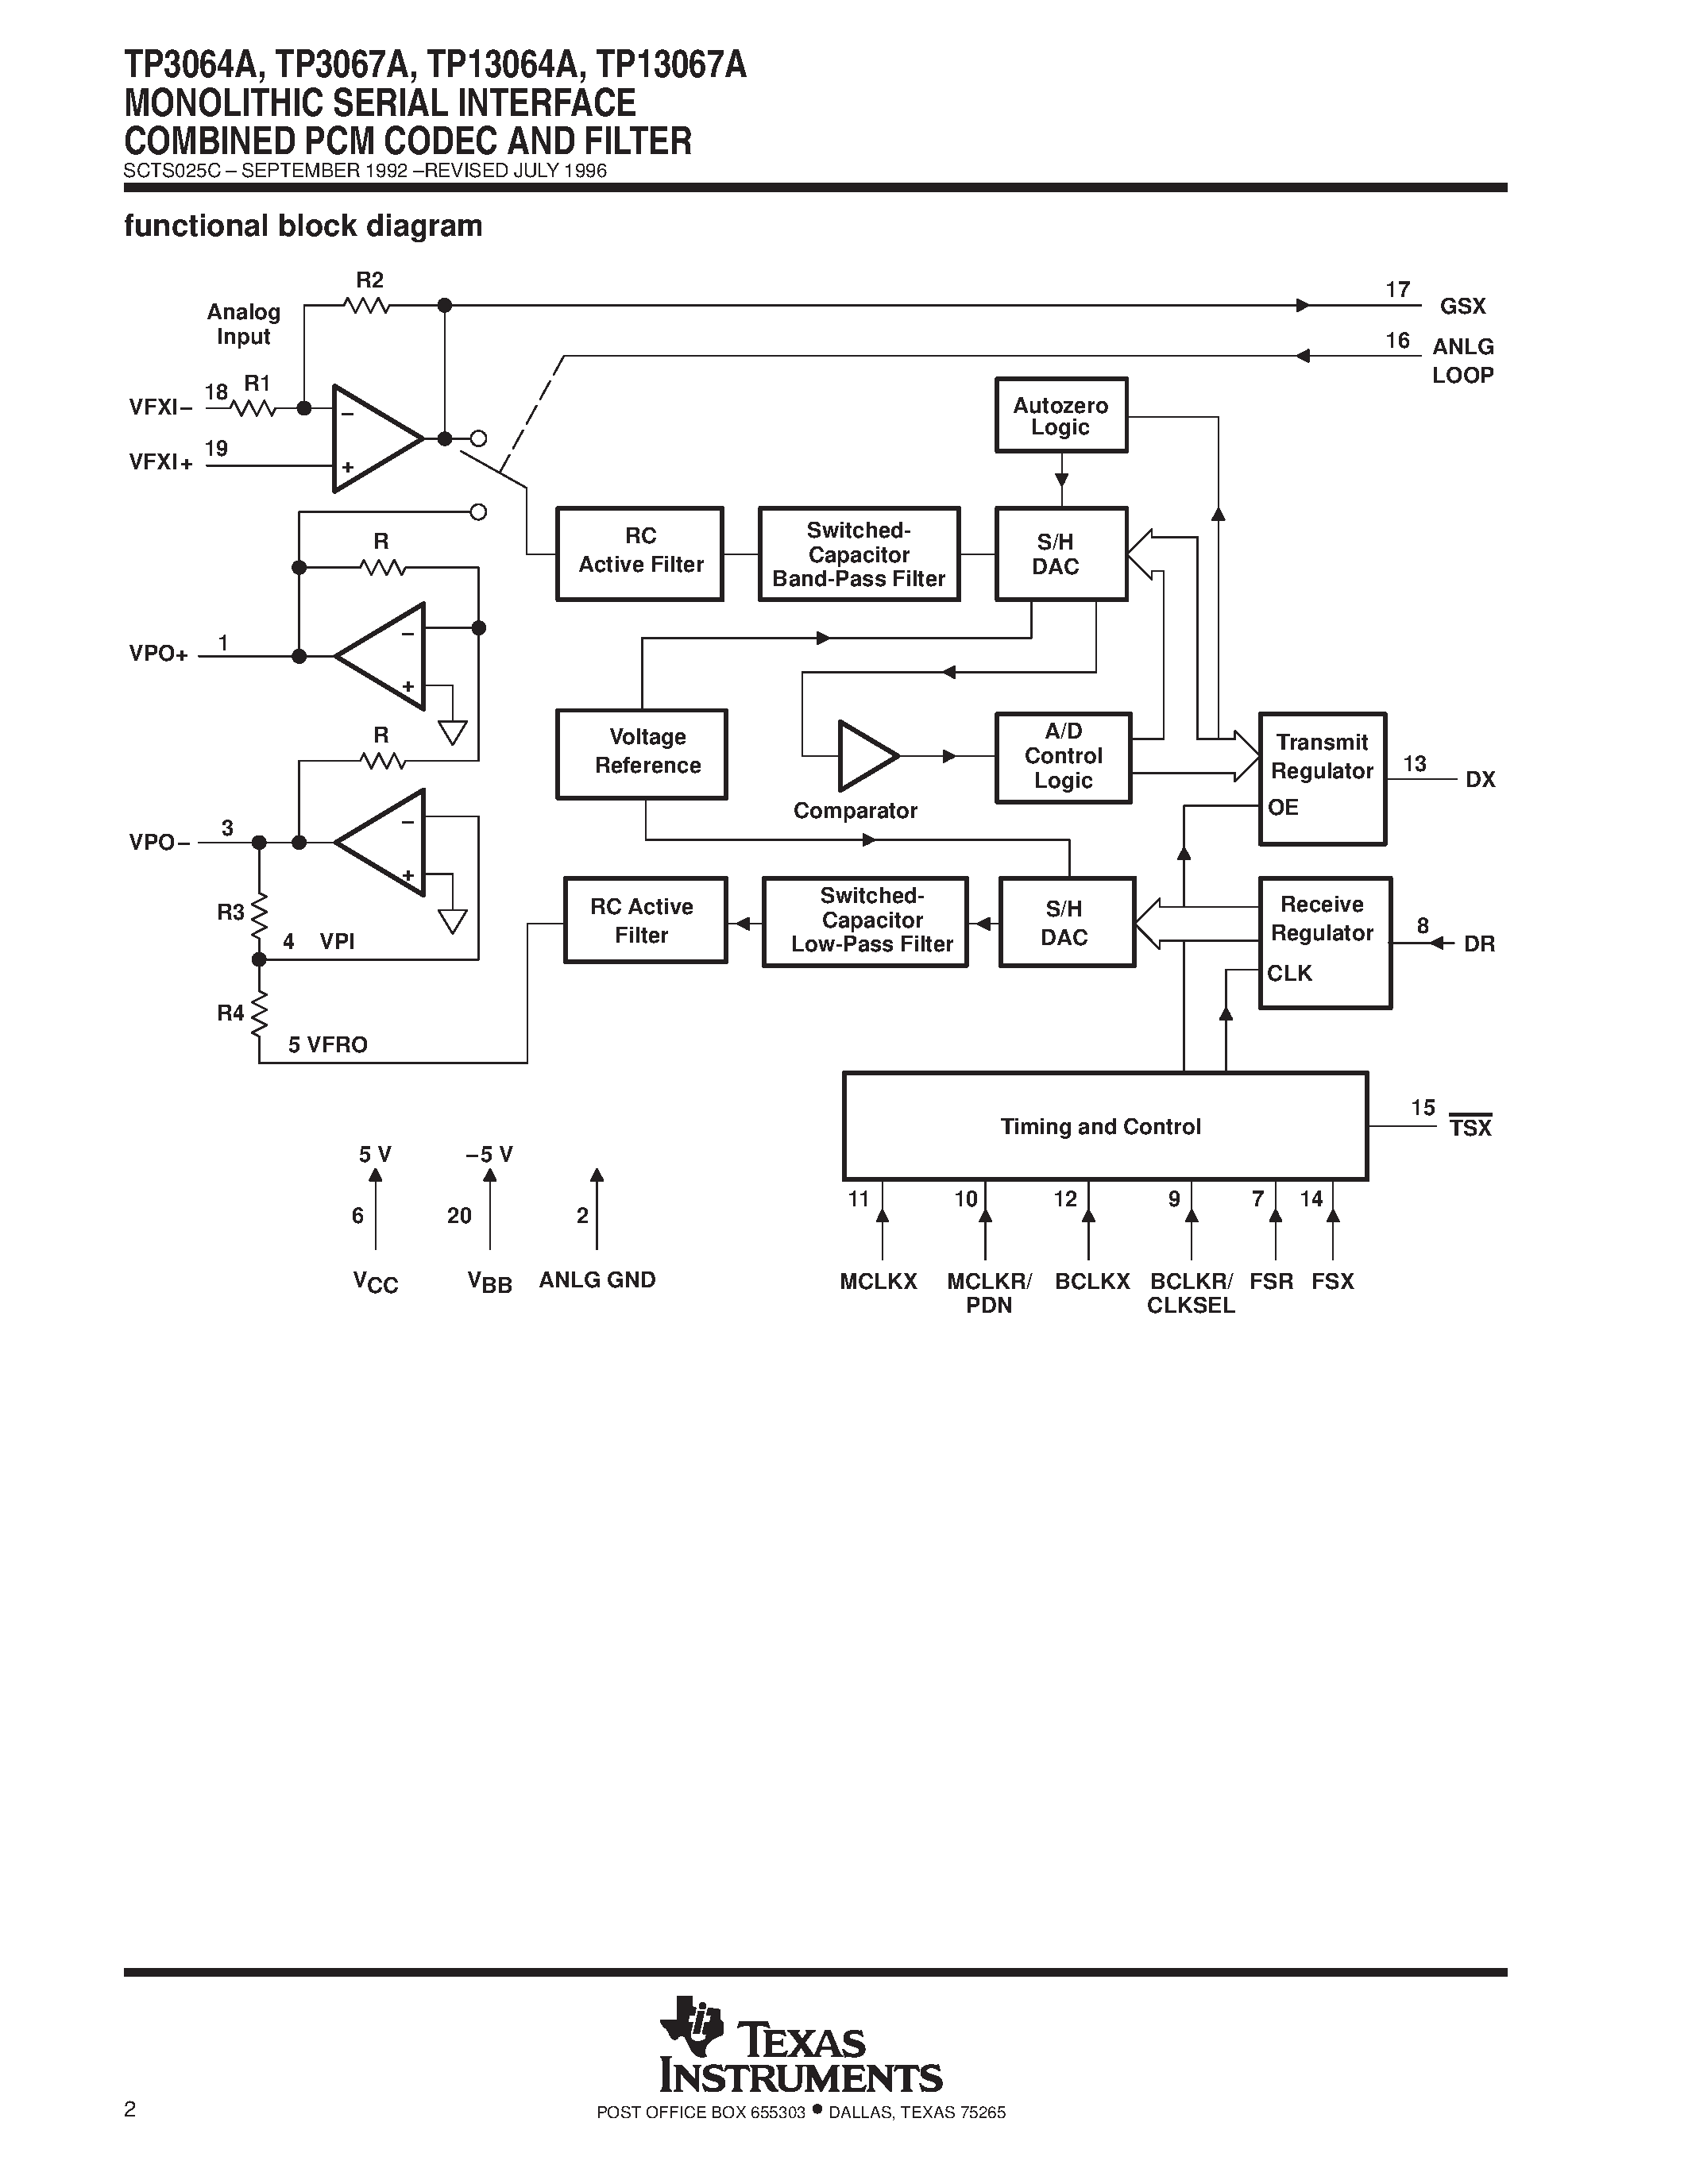 Datasheet TP13067A - MONOLITHIC SERIAL INTERFACE COMBINED PCM CODEC AND FILTER page 2